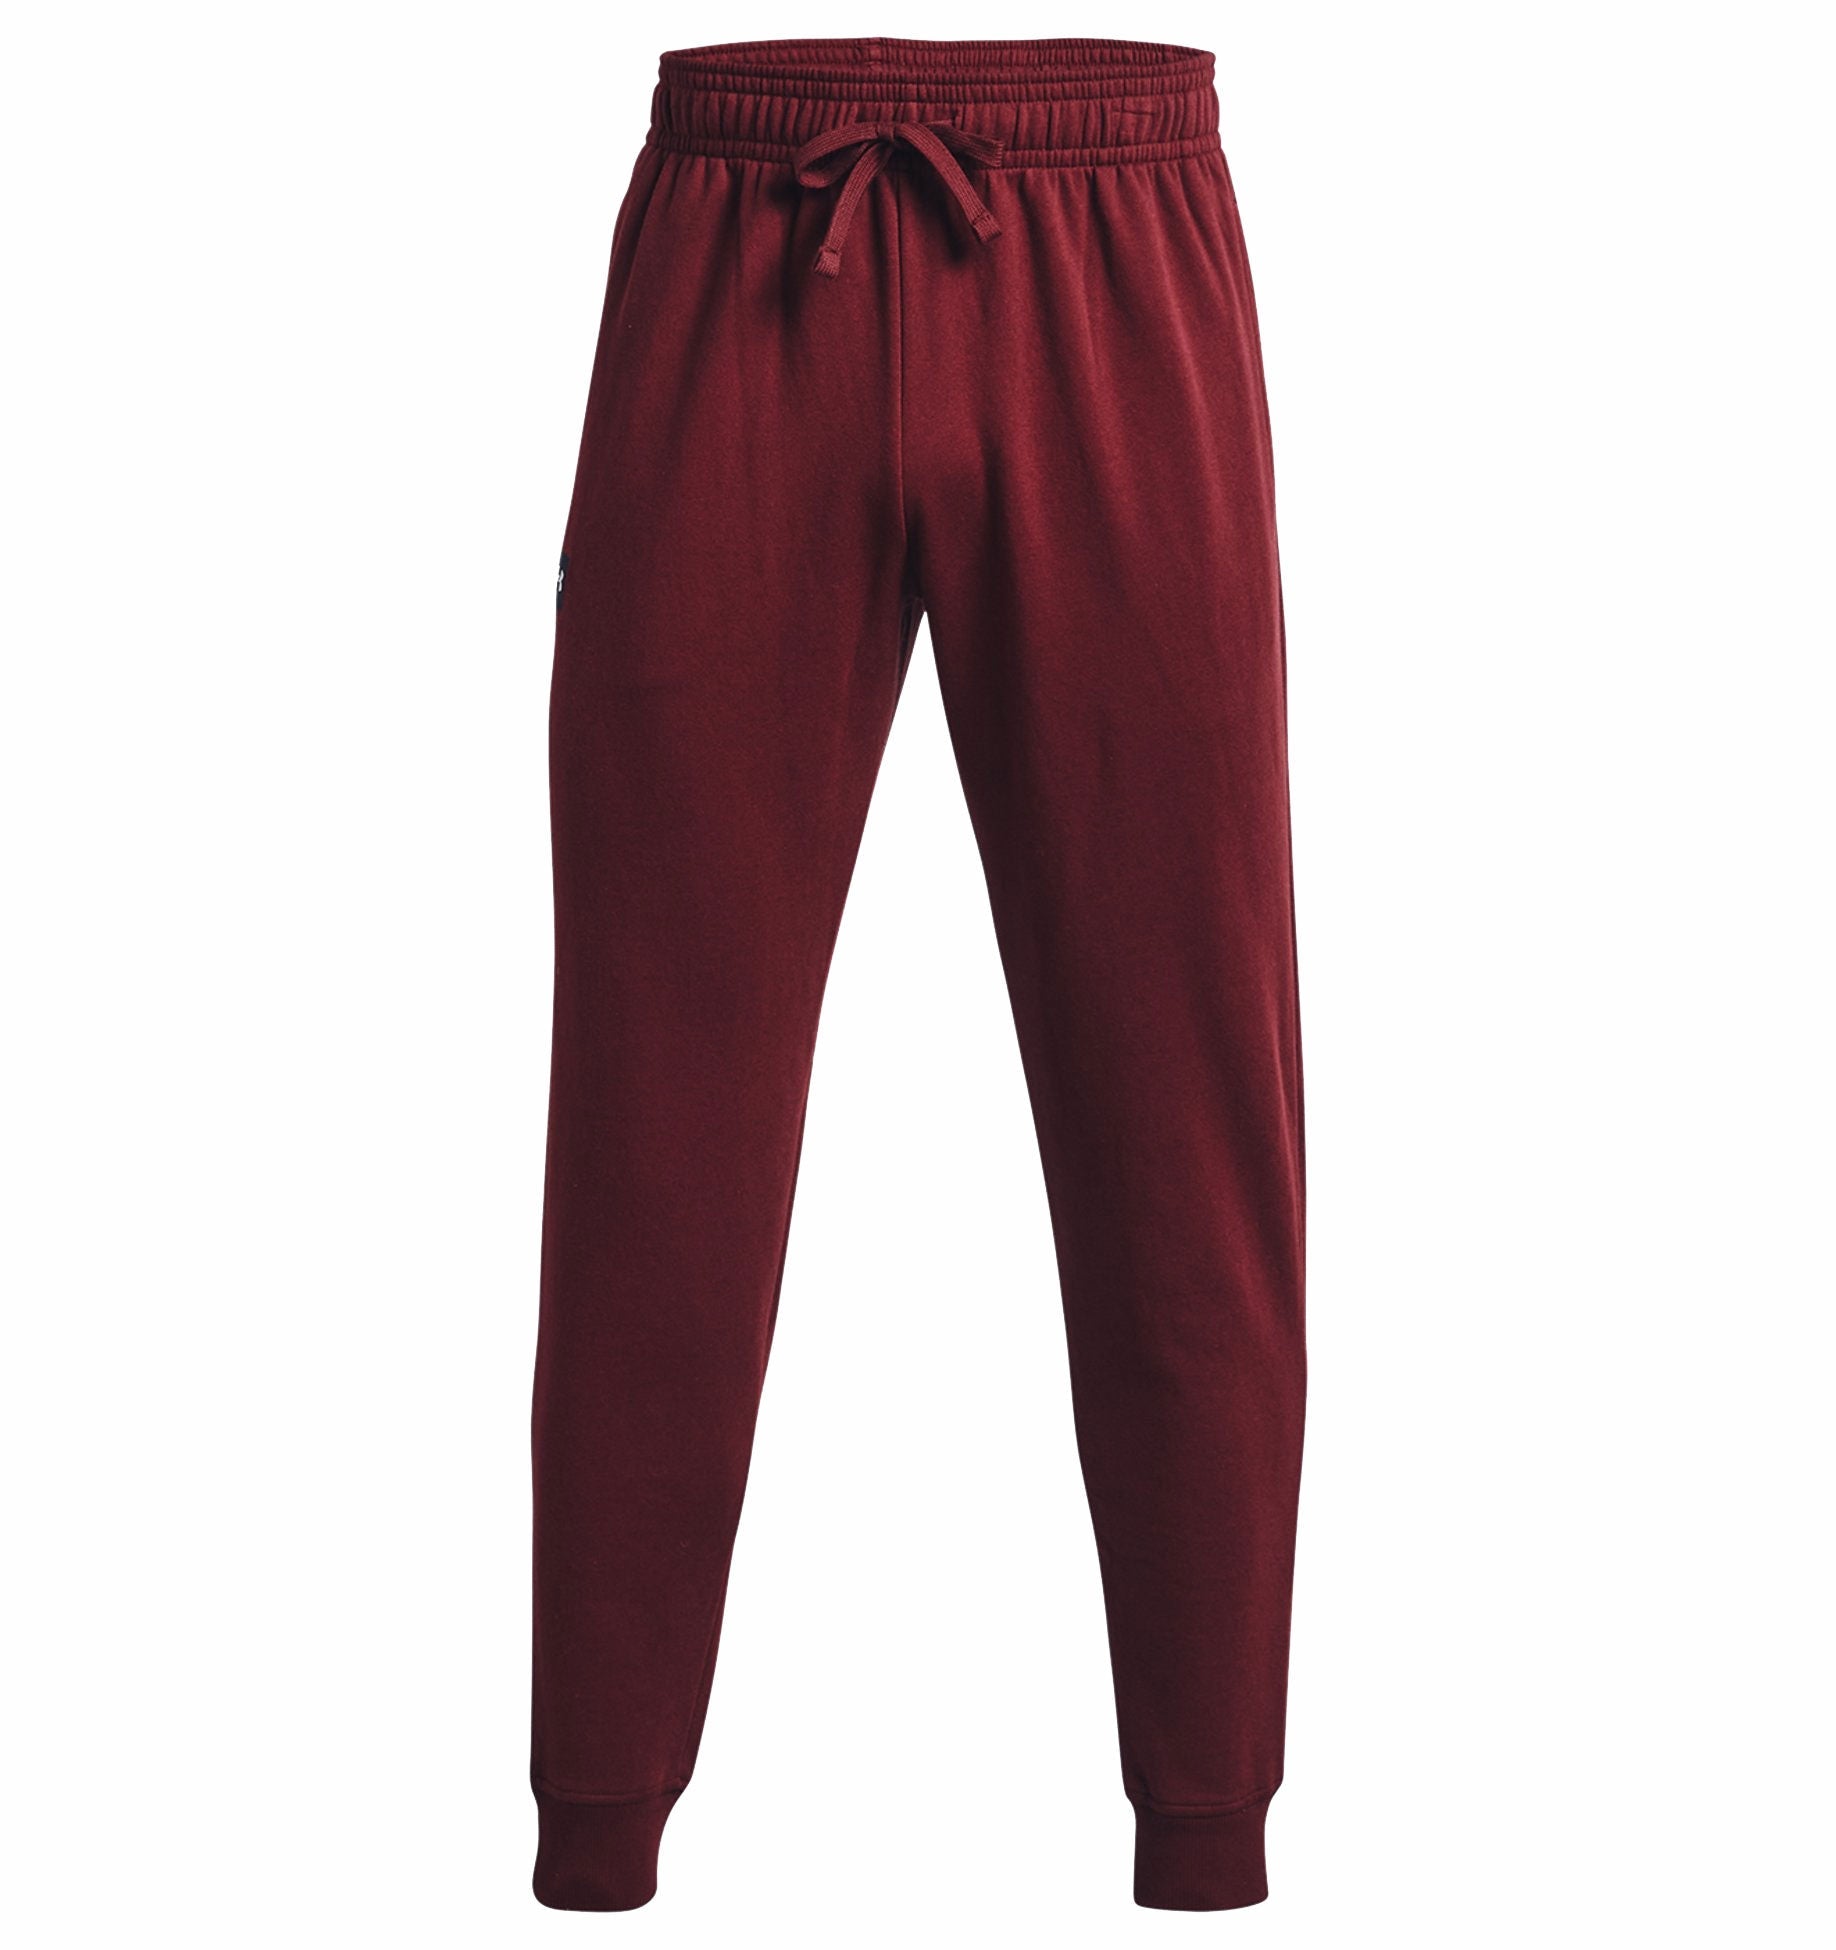 Under Armour Rival Fleece Sweat Pants - Mens - Chestnut Red/Onyx